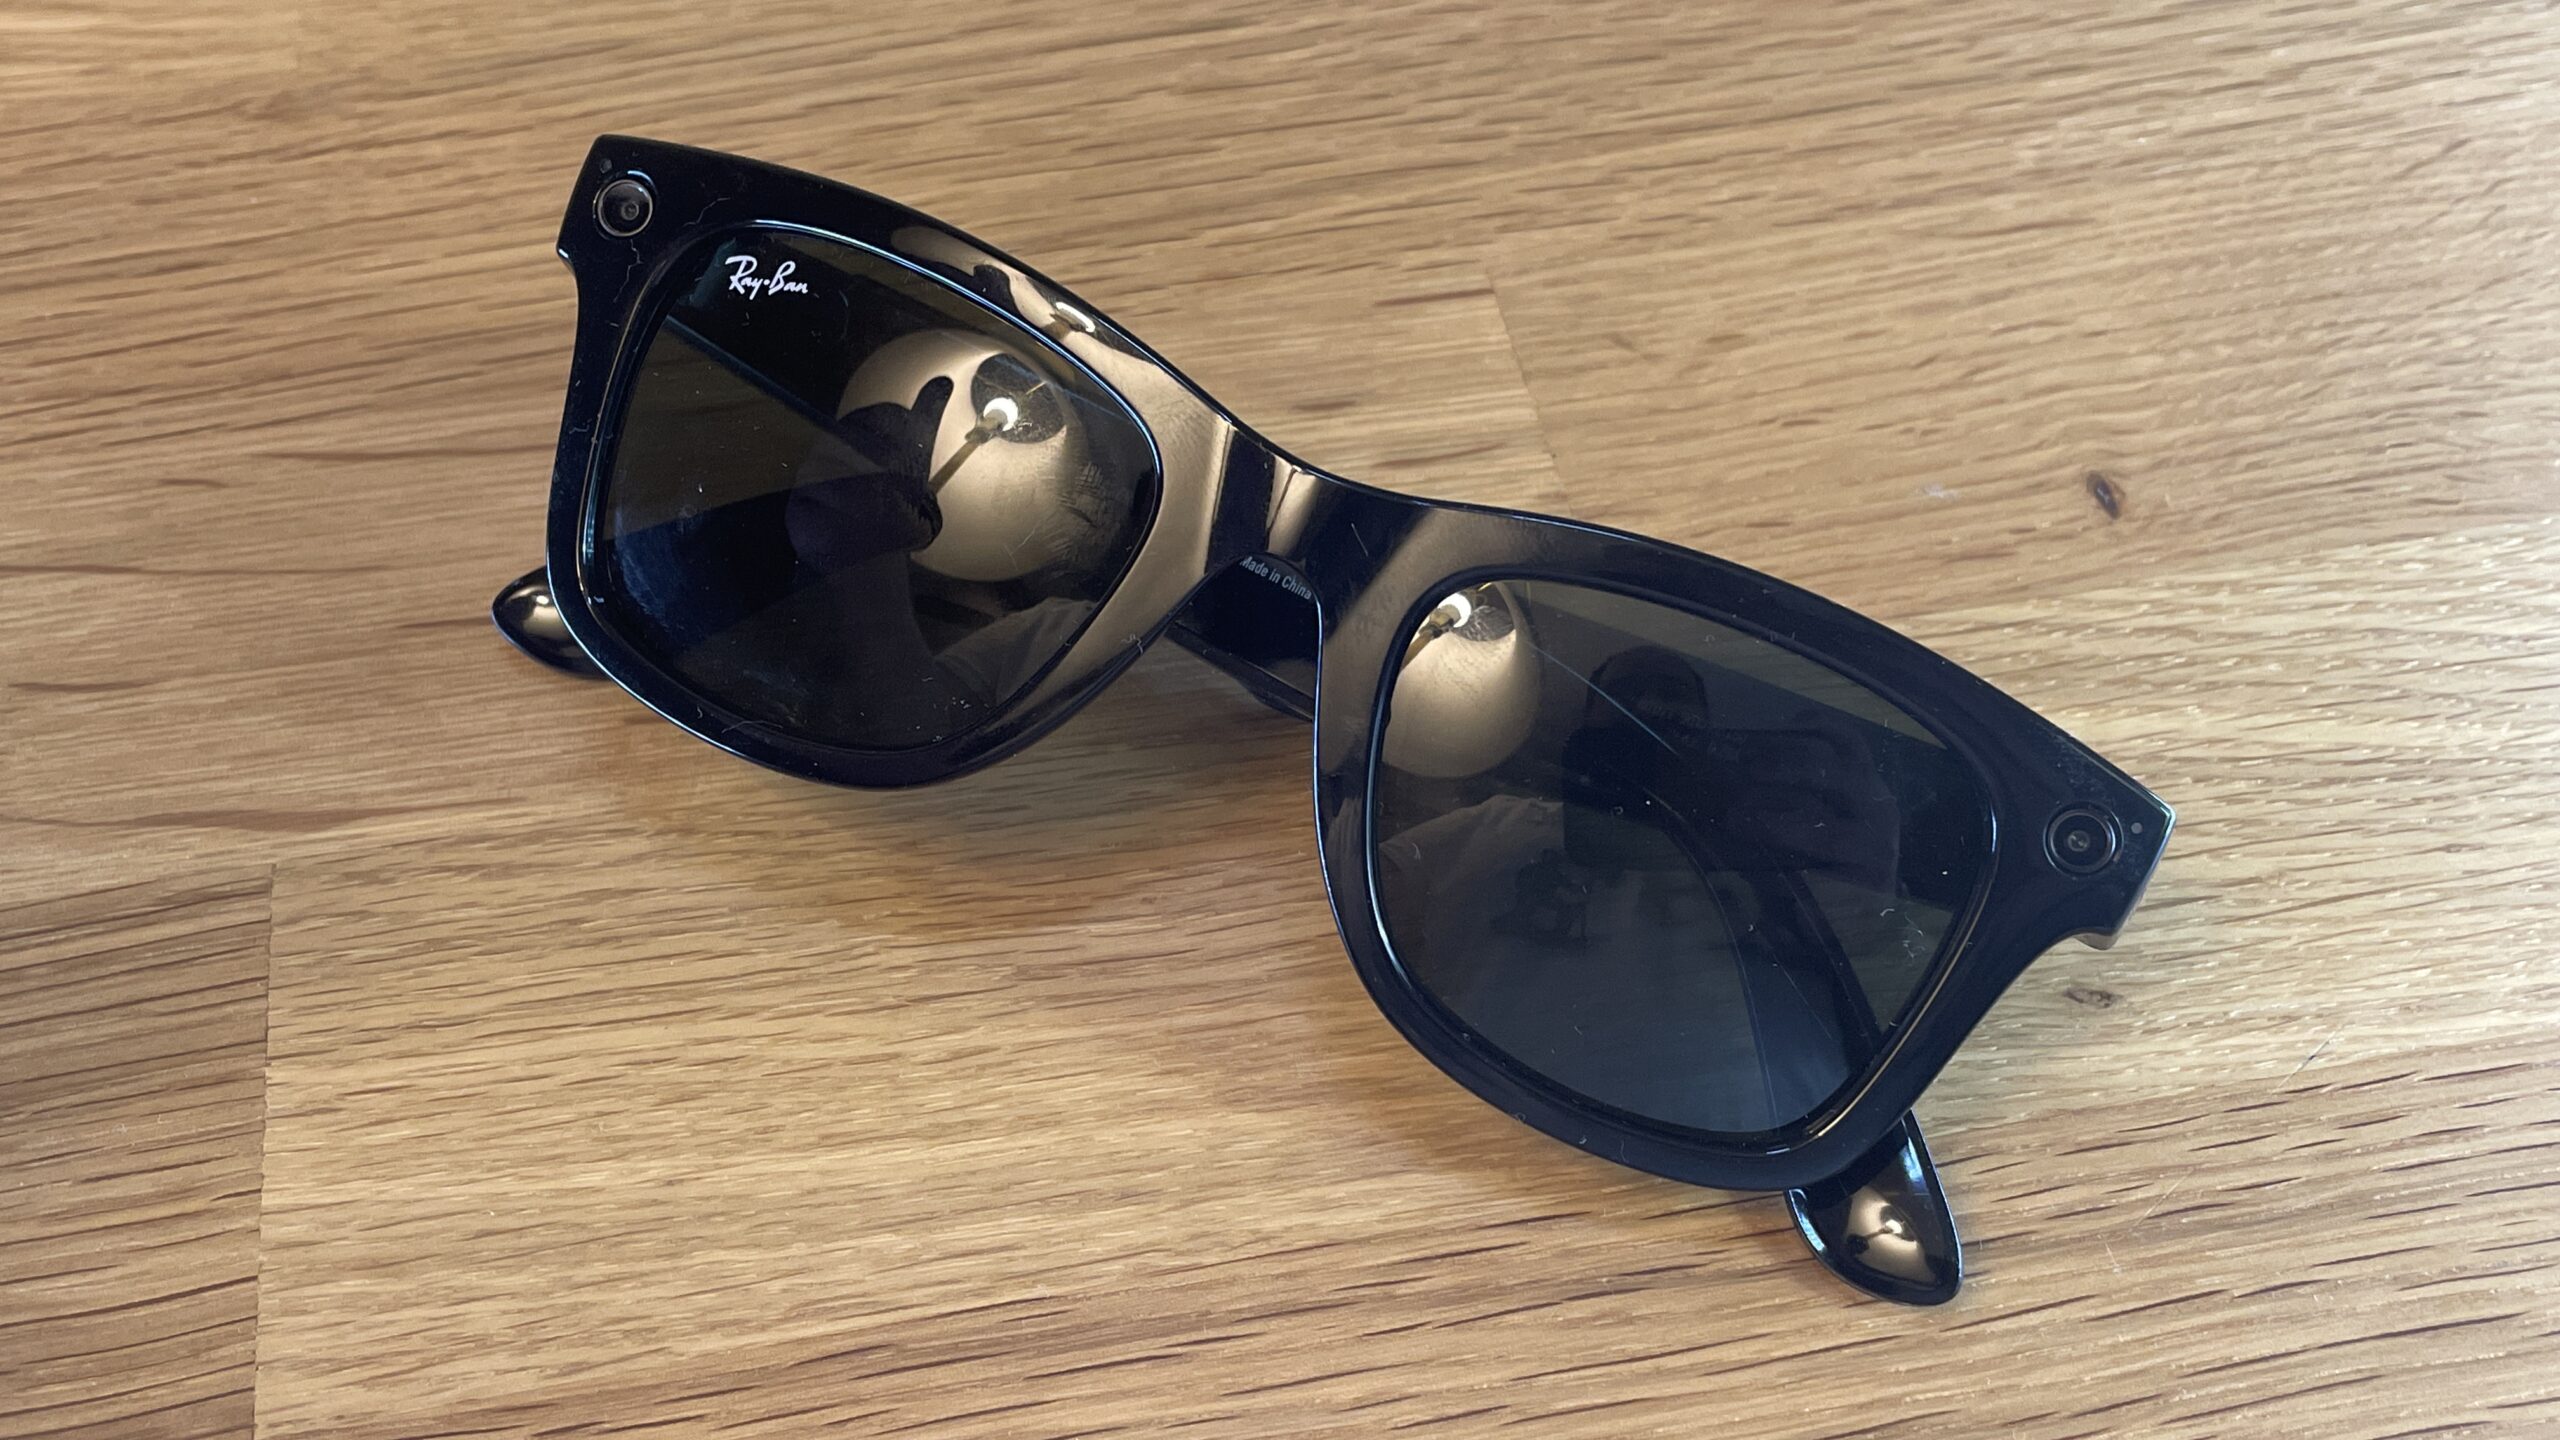 Ray-Ban Stories Smart Sunglasses Review